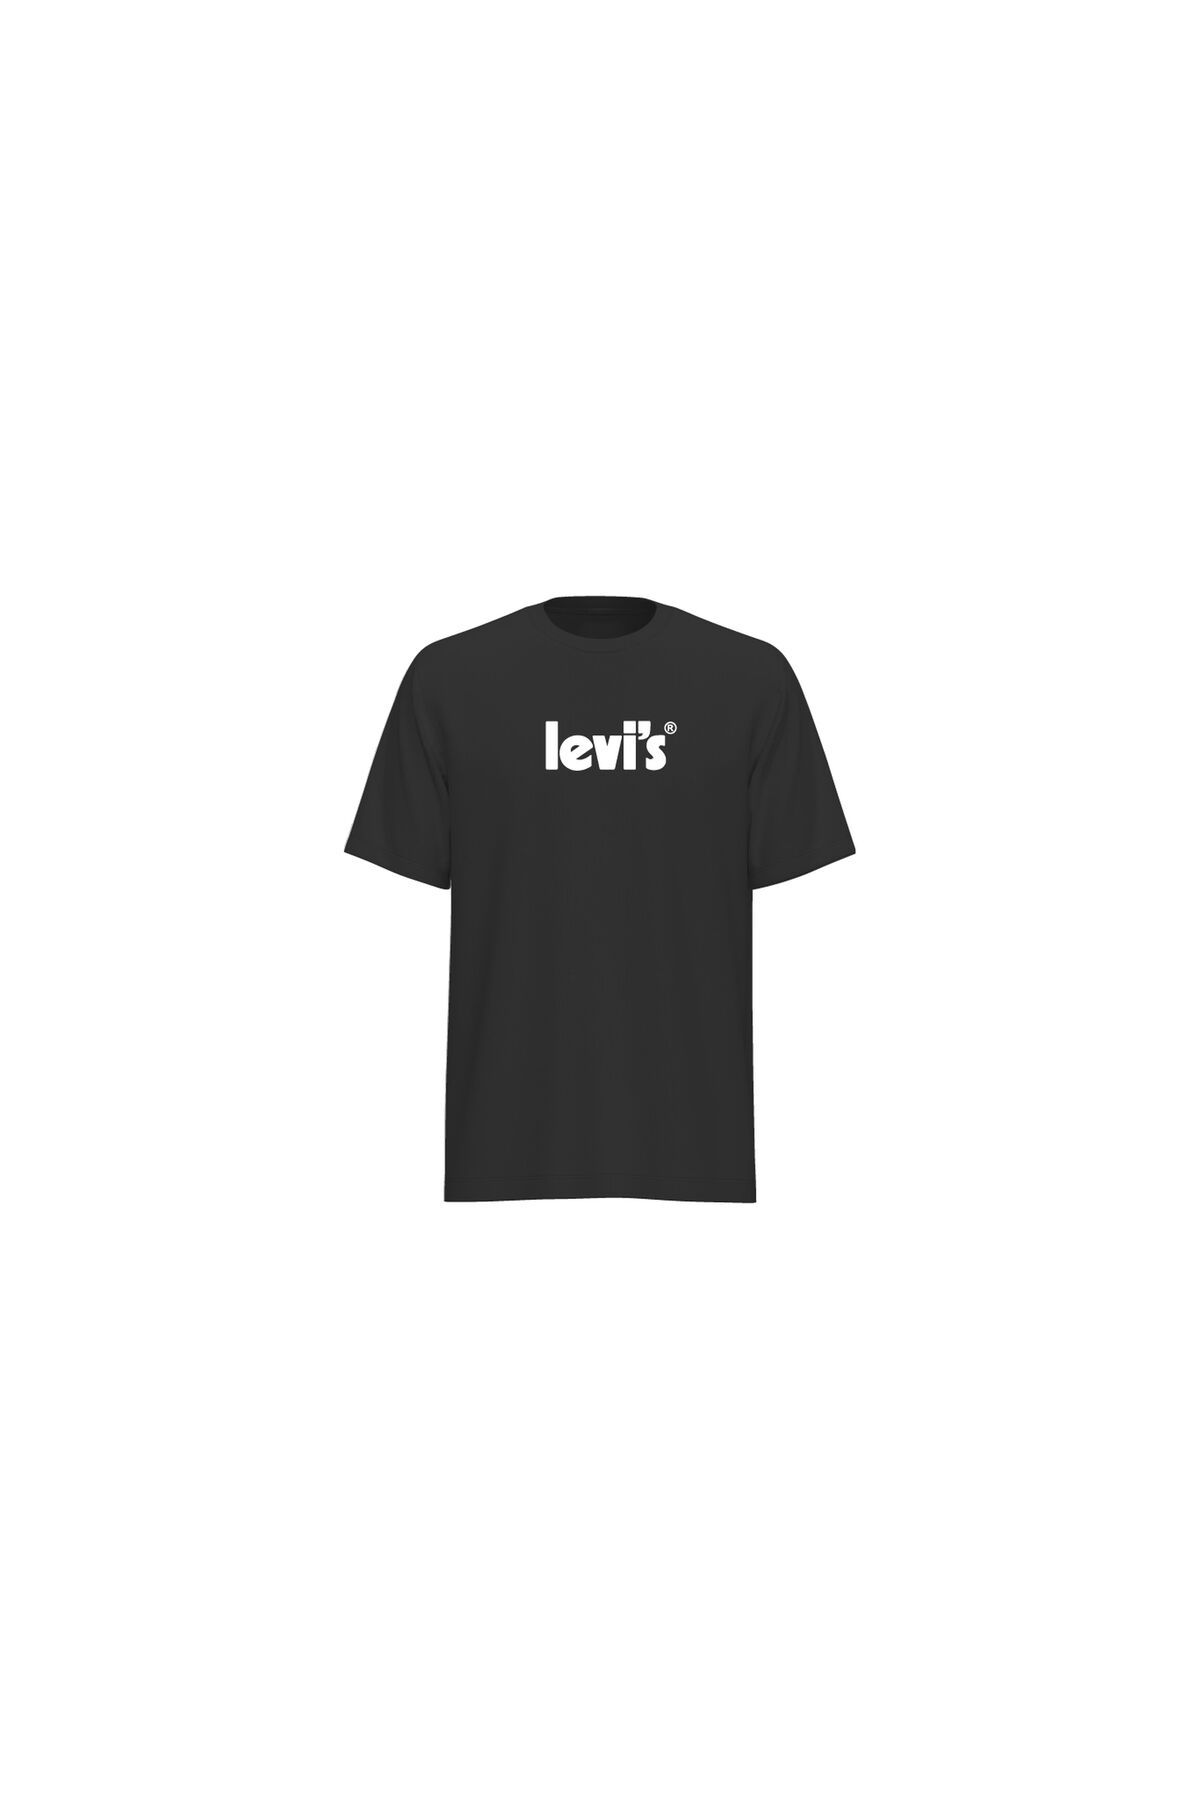 Levi's Relaxed Fit Tee